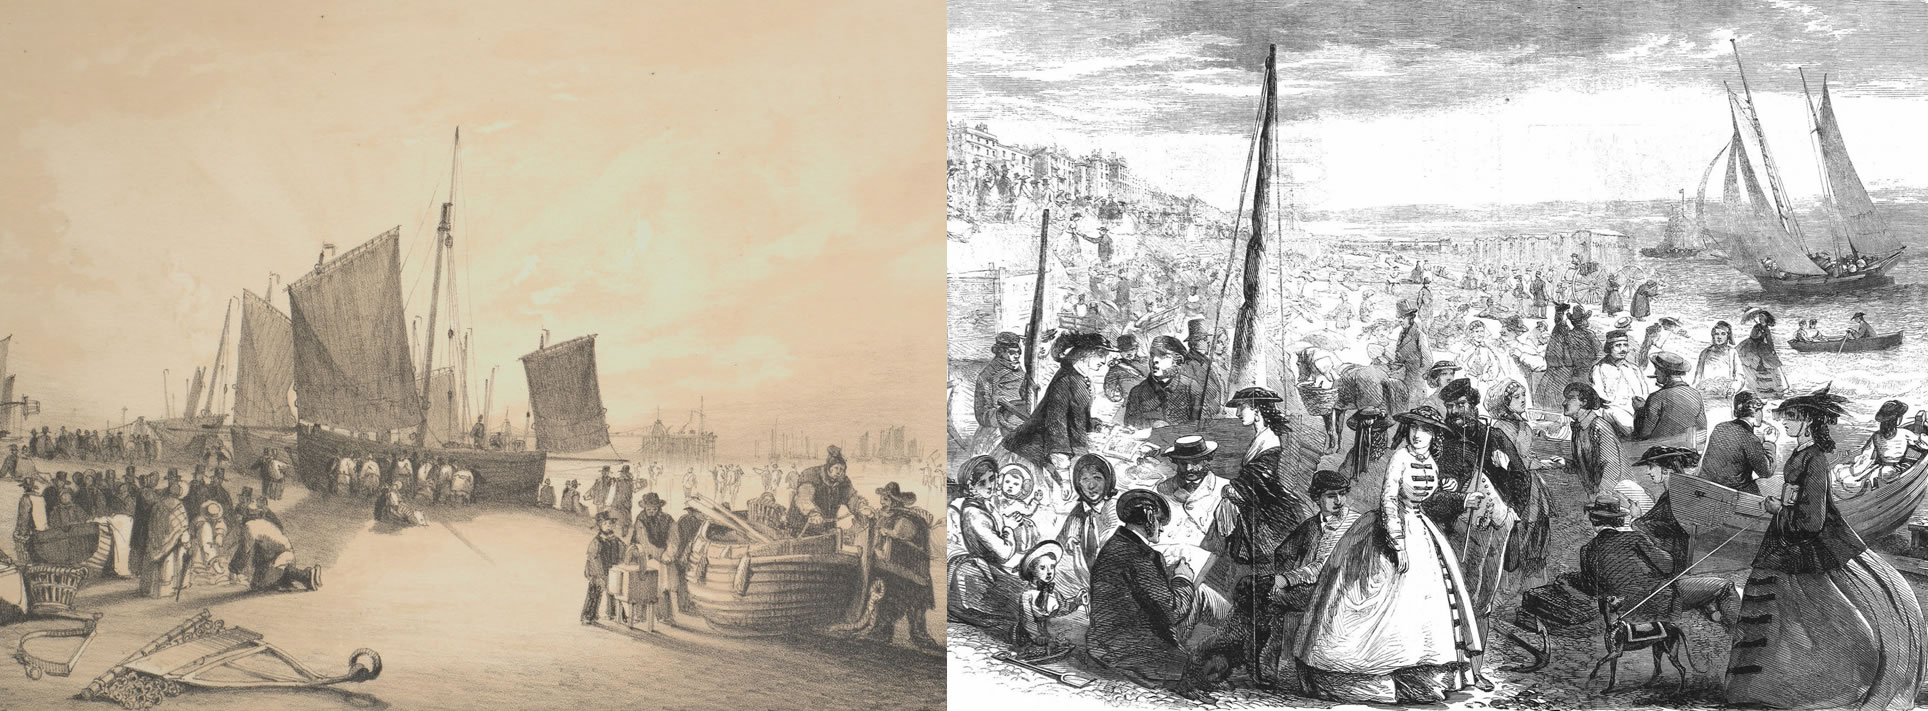 A tale of two cities: a fish market on the beach at Brighton in 1846 and – from The Genealogist's
				Illustrated
				London News collection – a fashionable beach scene on the same shores in 1859.